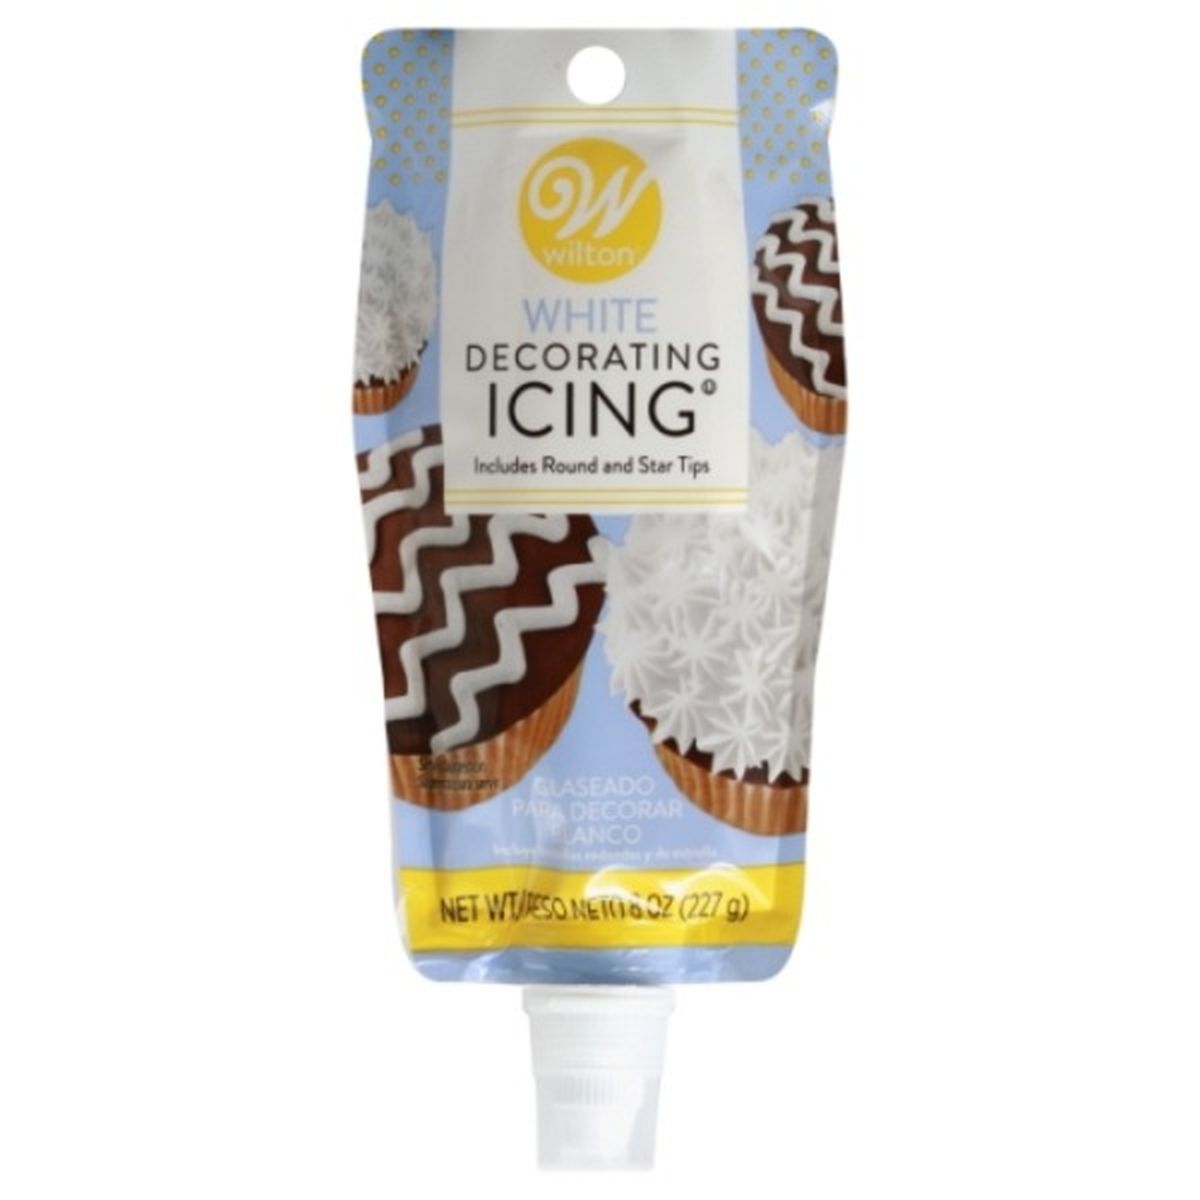 Calories in Wilton Icing, Decorating, White